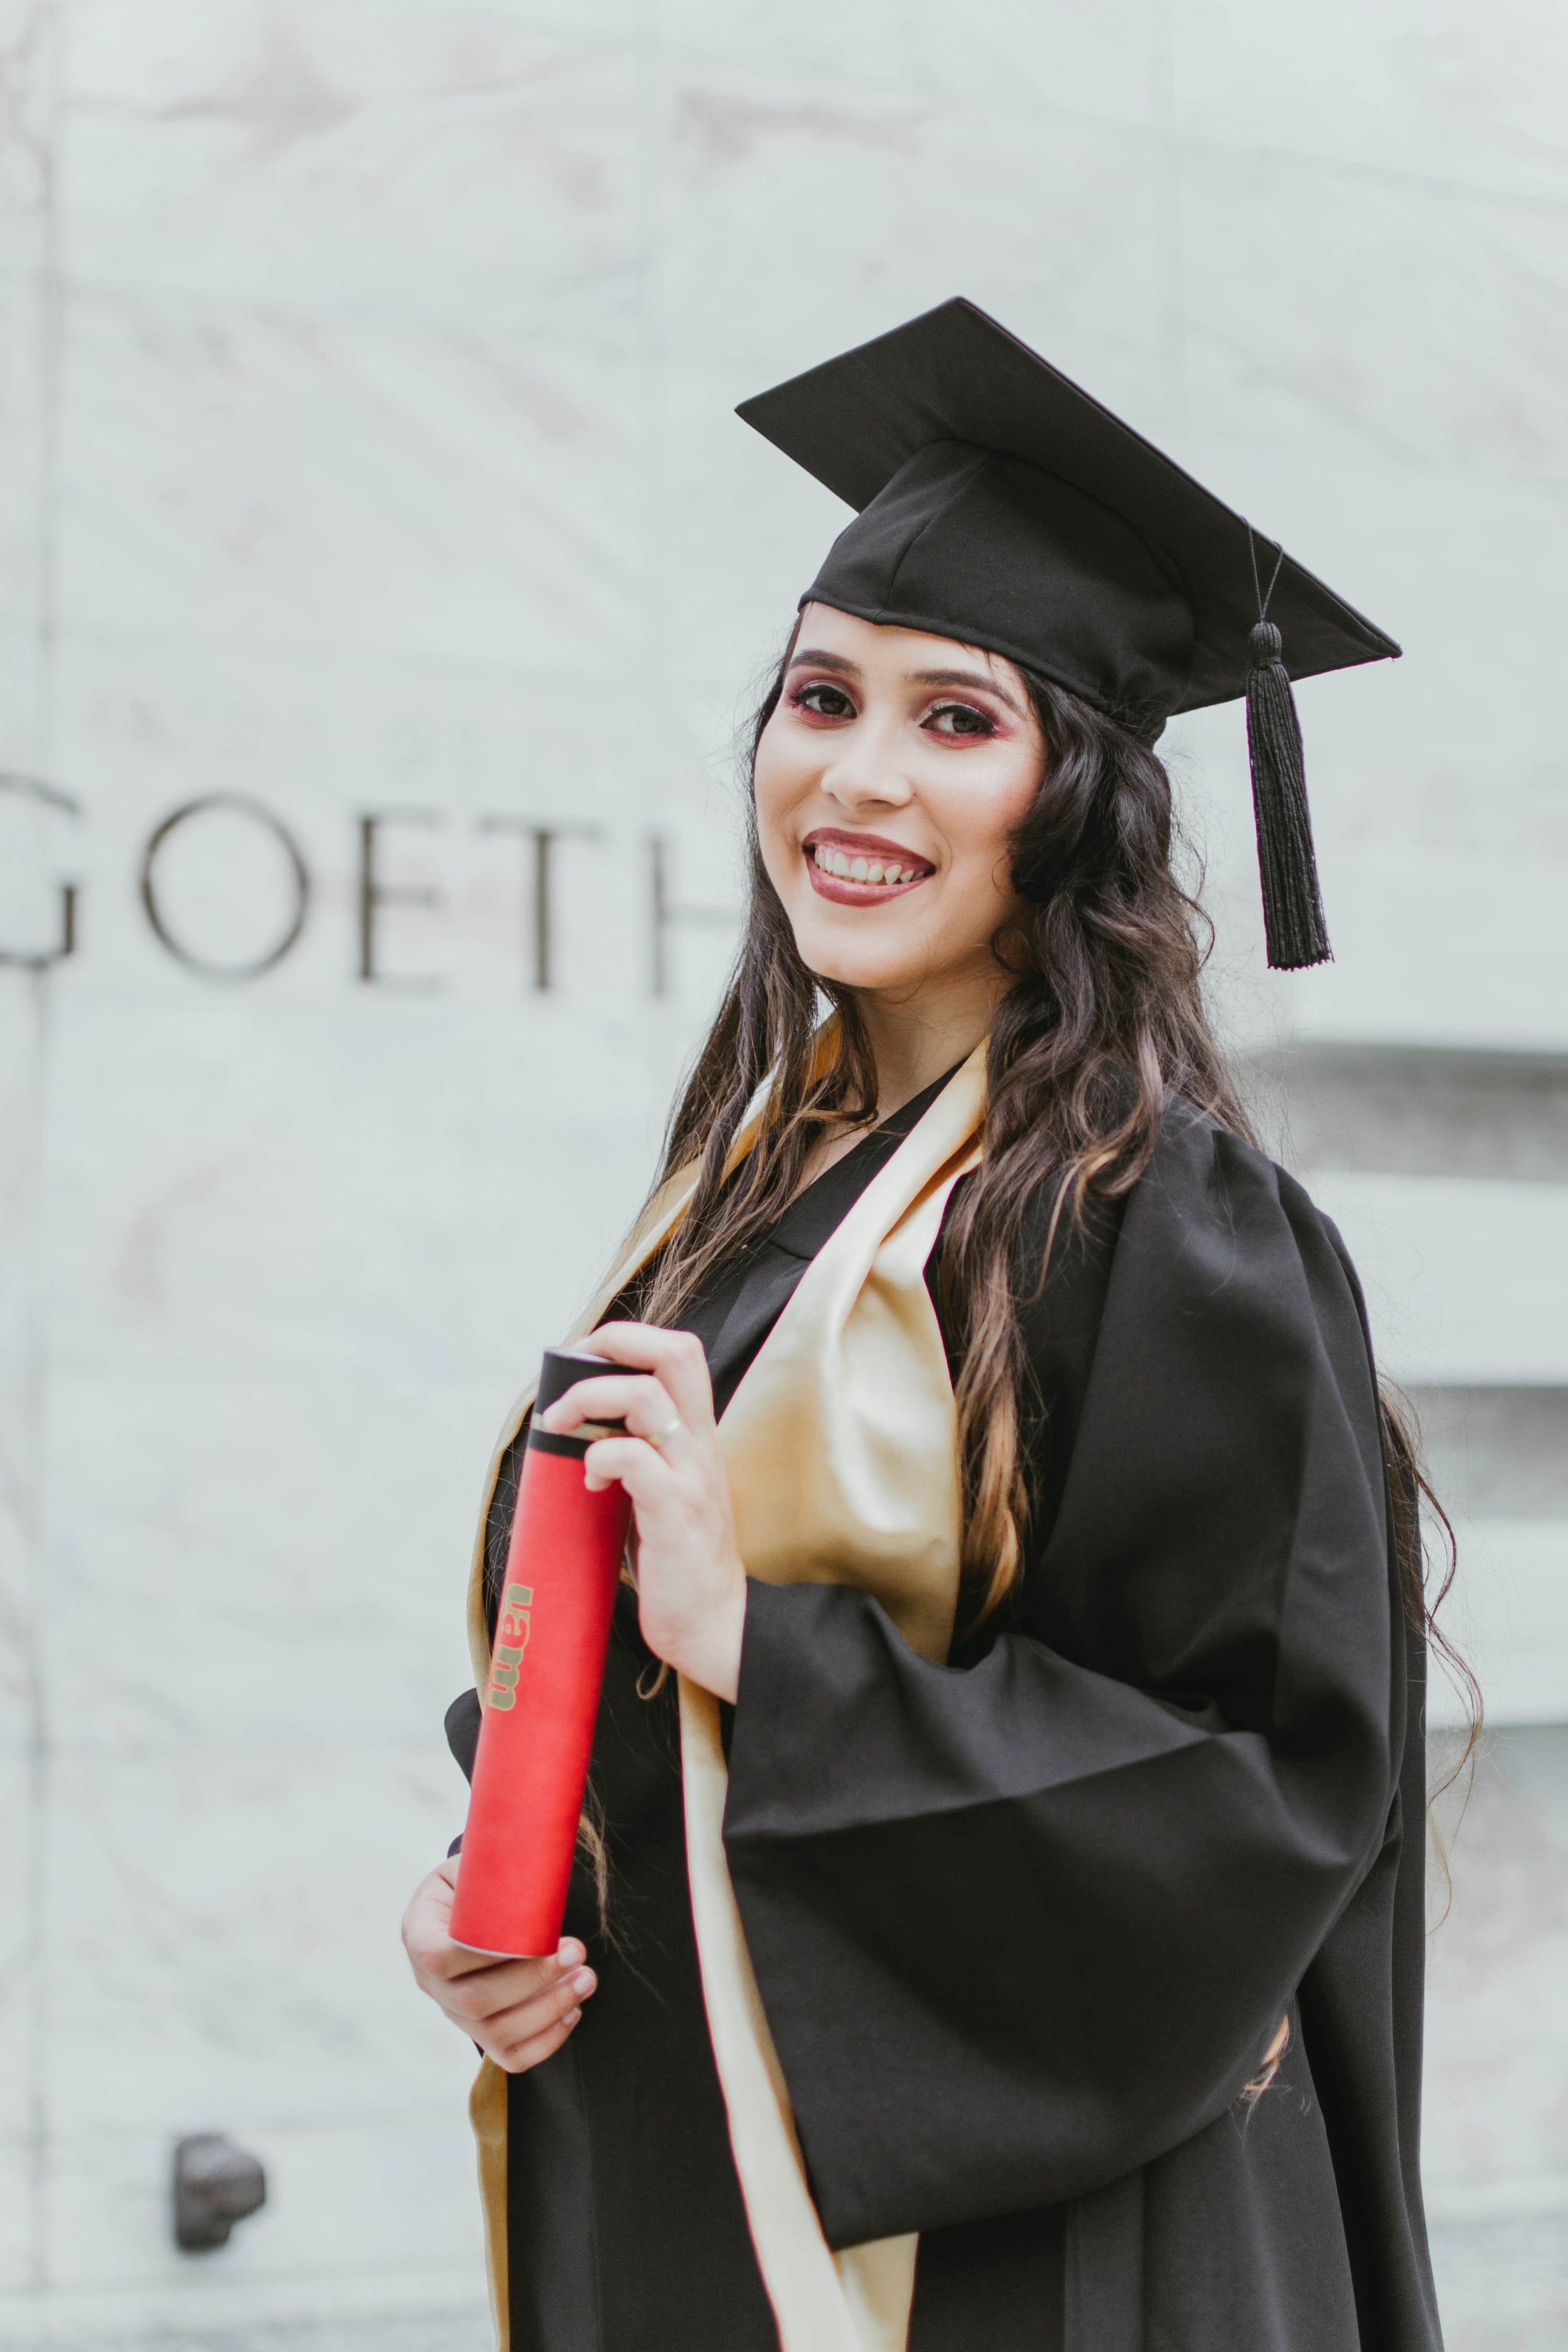 A young woman dressed in academic attire while holding a qualification | Source: Pexels